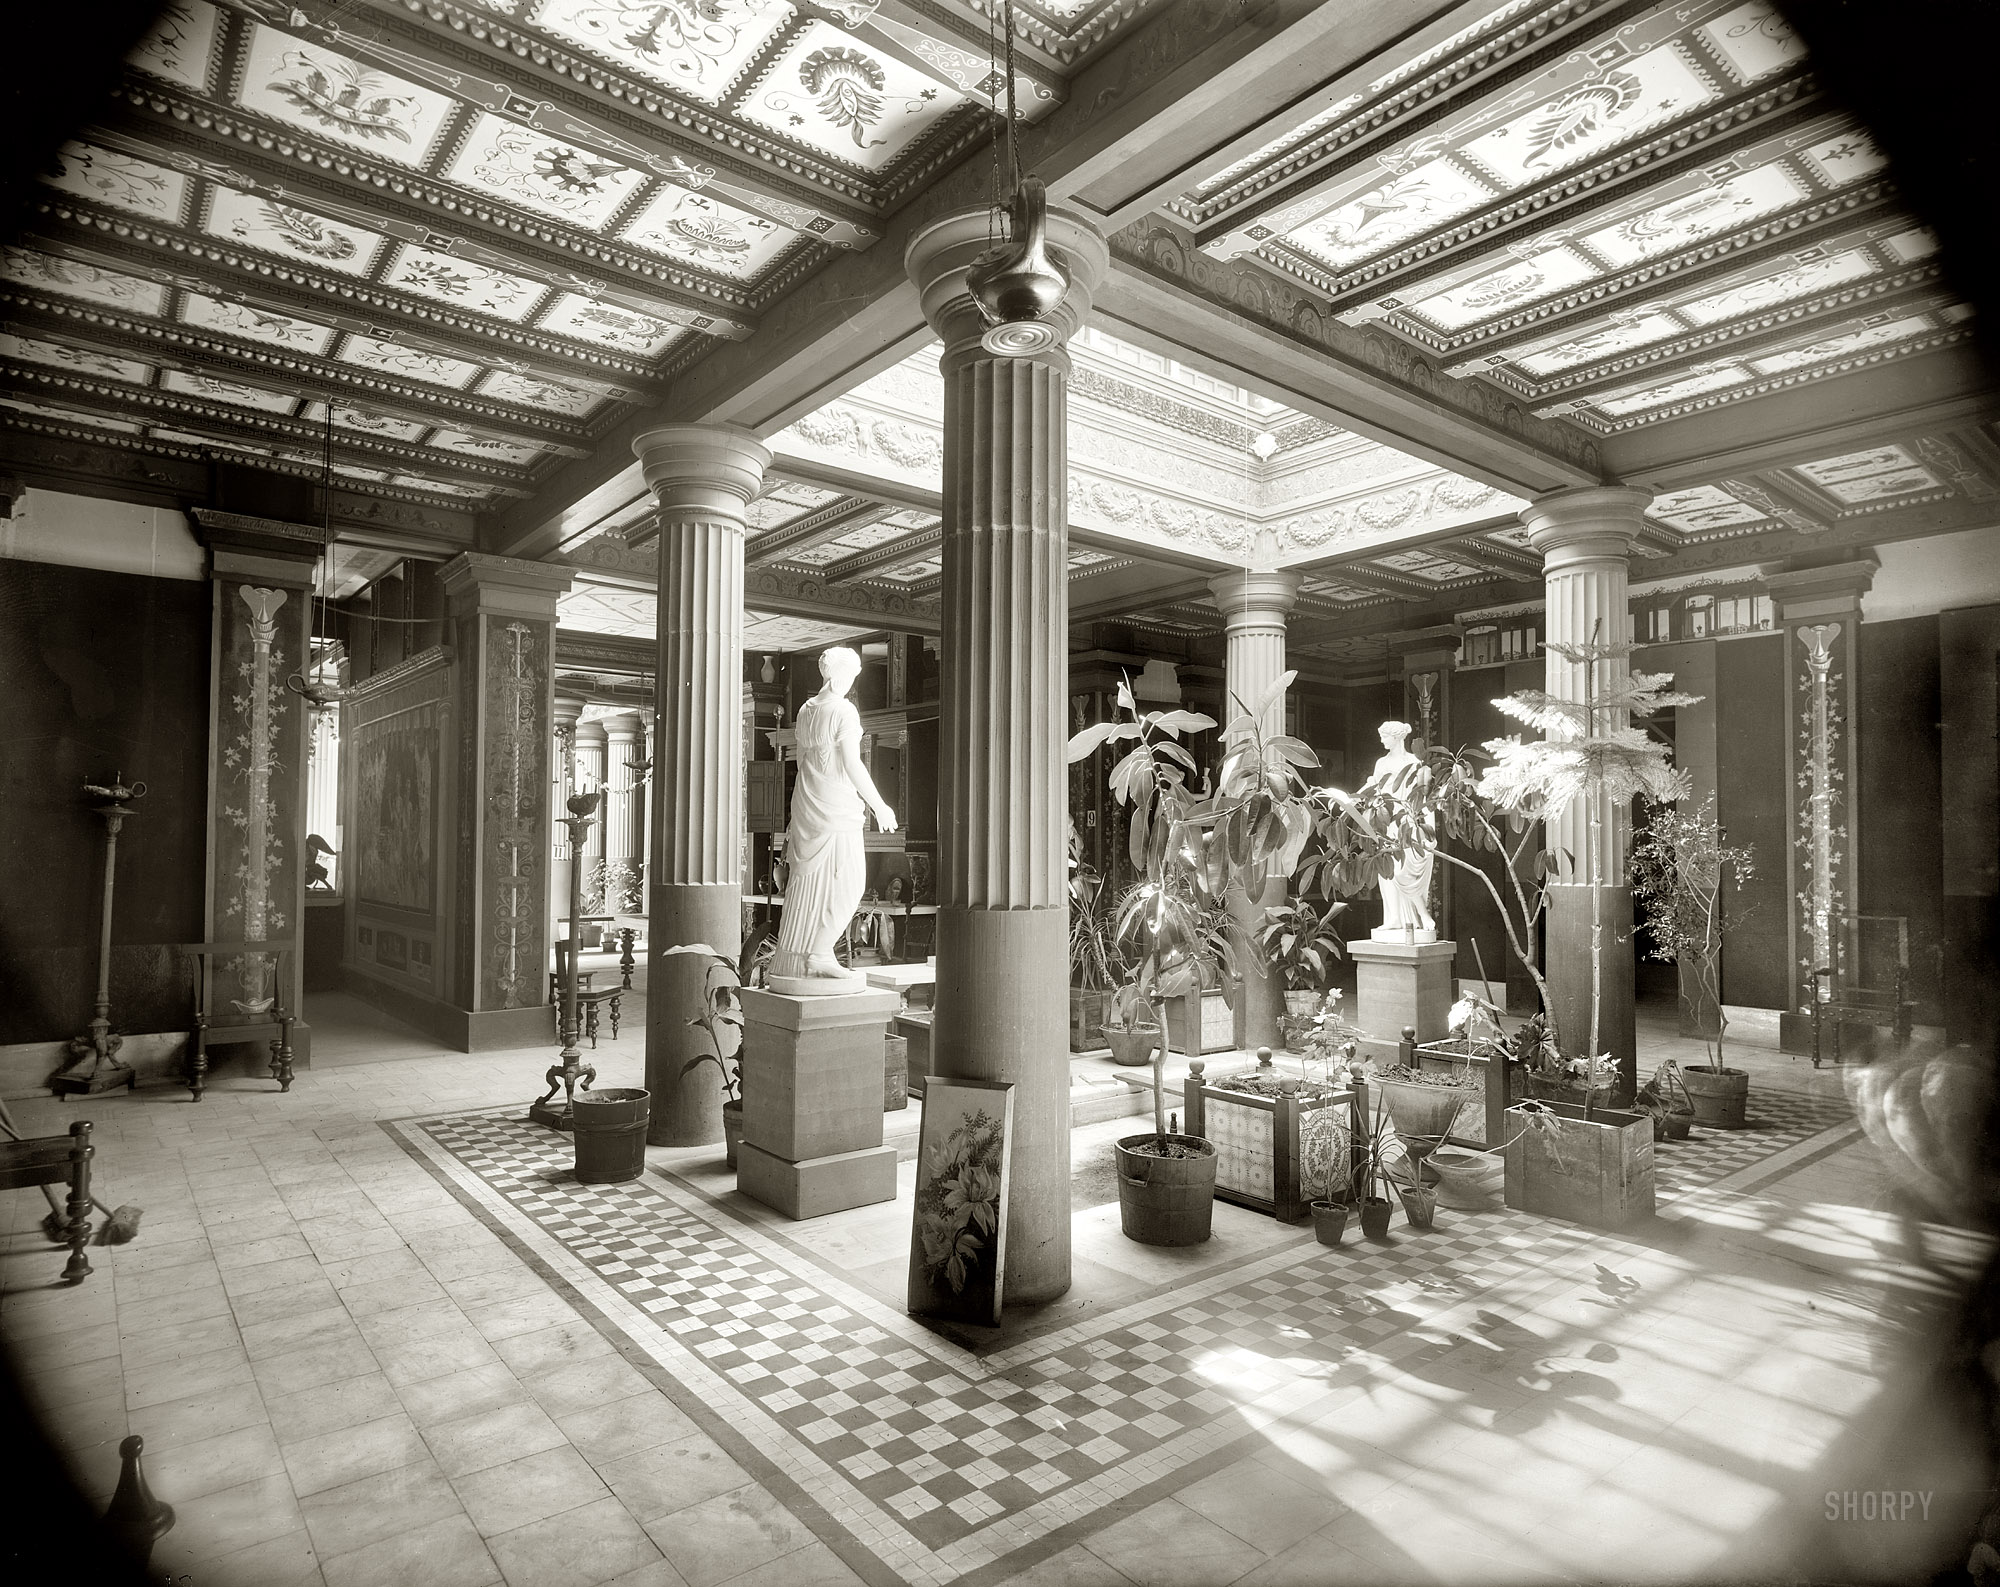 Saratoga Springs, New York, circa 1901. "Atrium in the House of Pansa." Replica of an ancient Roman home at the Pompeia, a museum in the upstate New York resort town of Saratoga Springs offering "Illustrations of History and Art." 8x10 inch dry plate glass negative, Detroit Publishing Company. View full size.